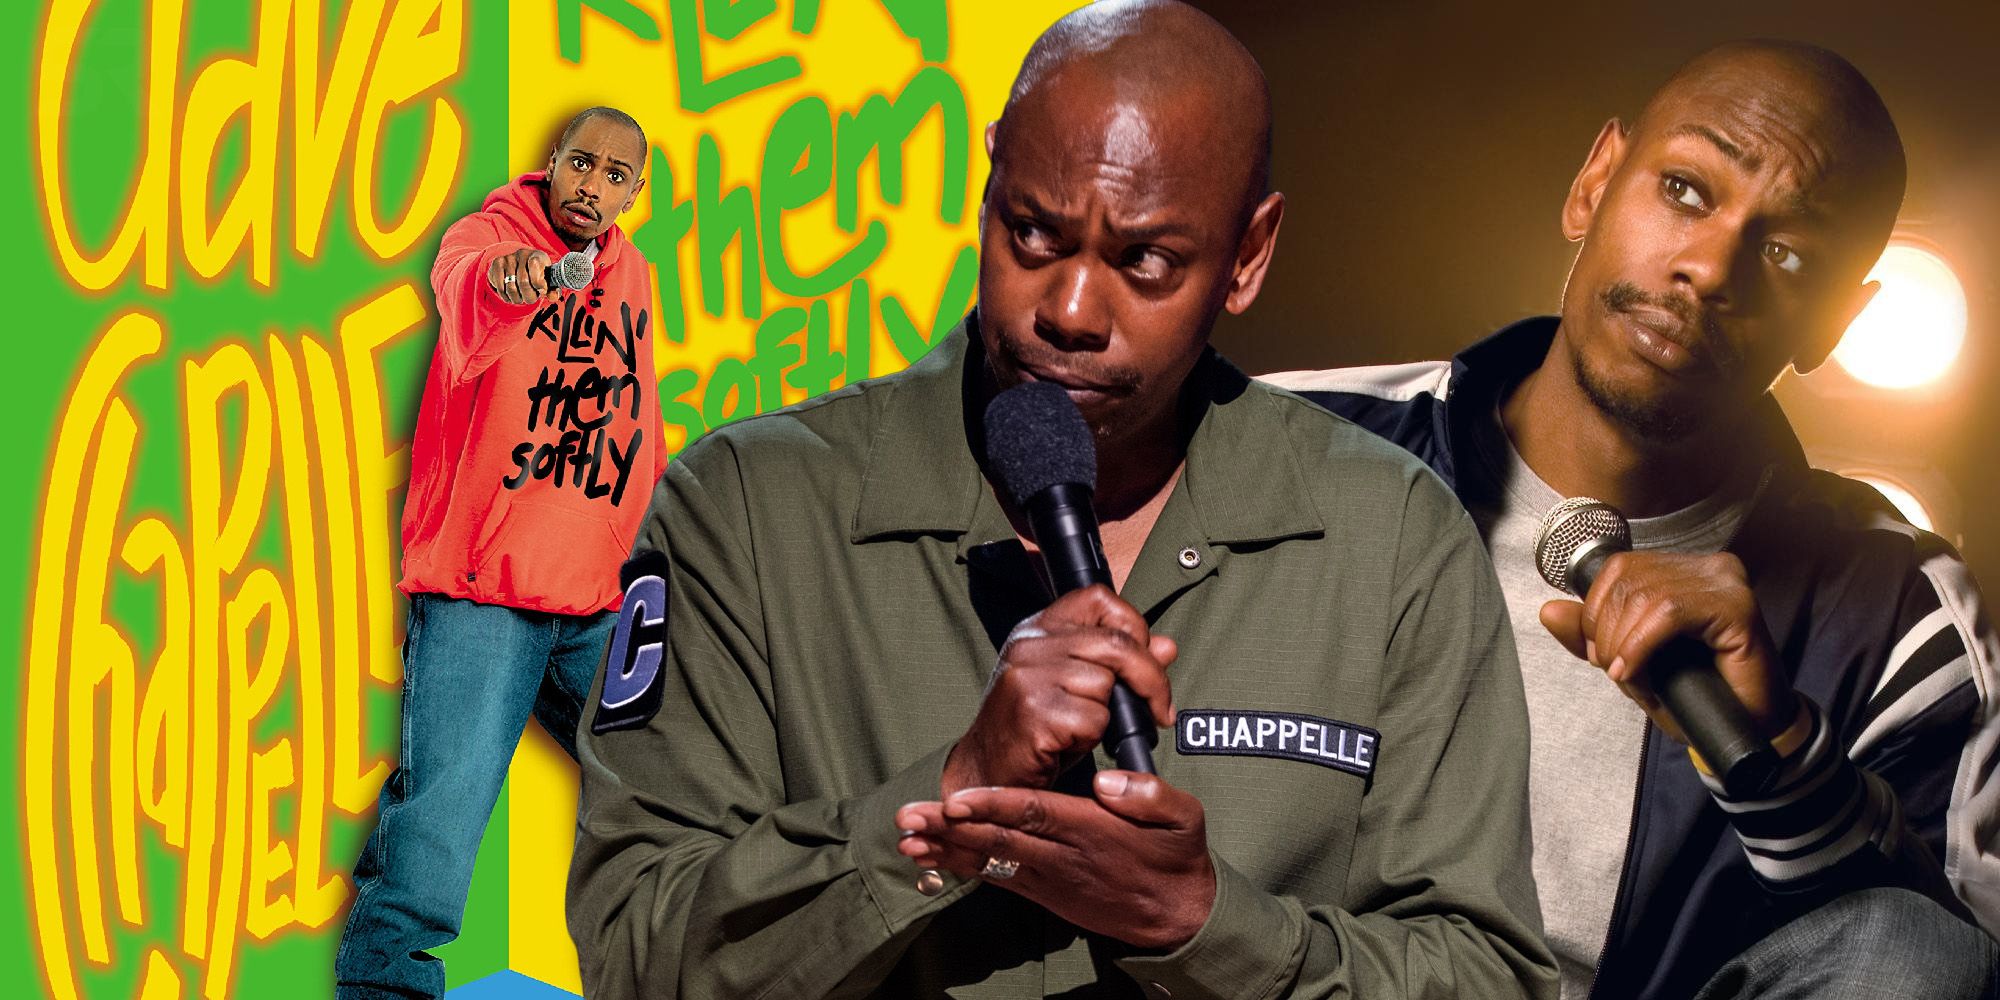 Dave Chappelle's Best Comedy Specials